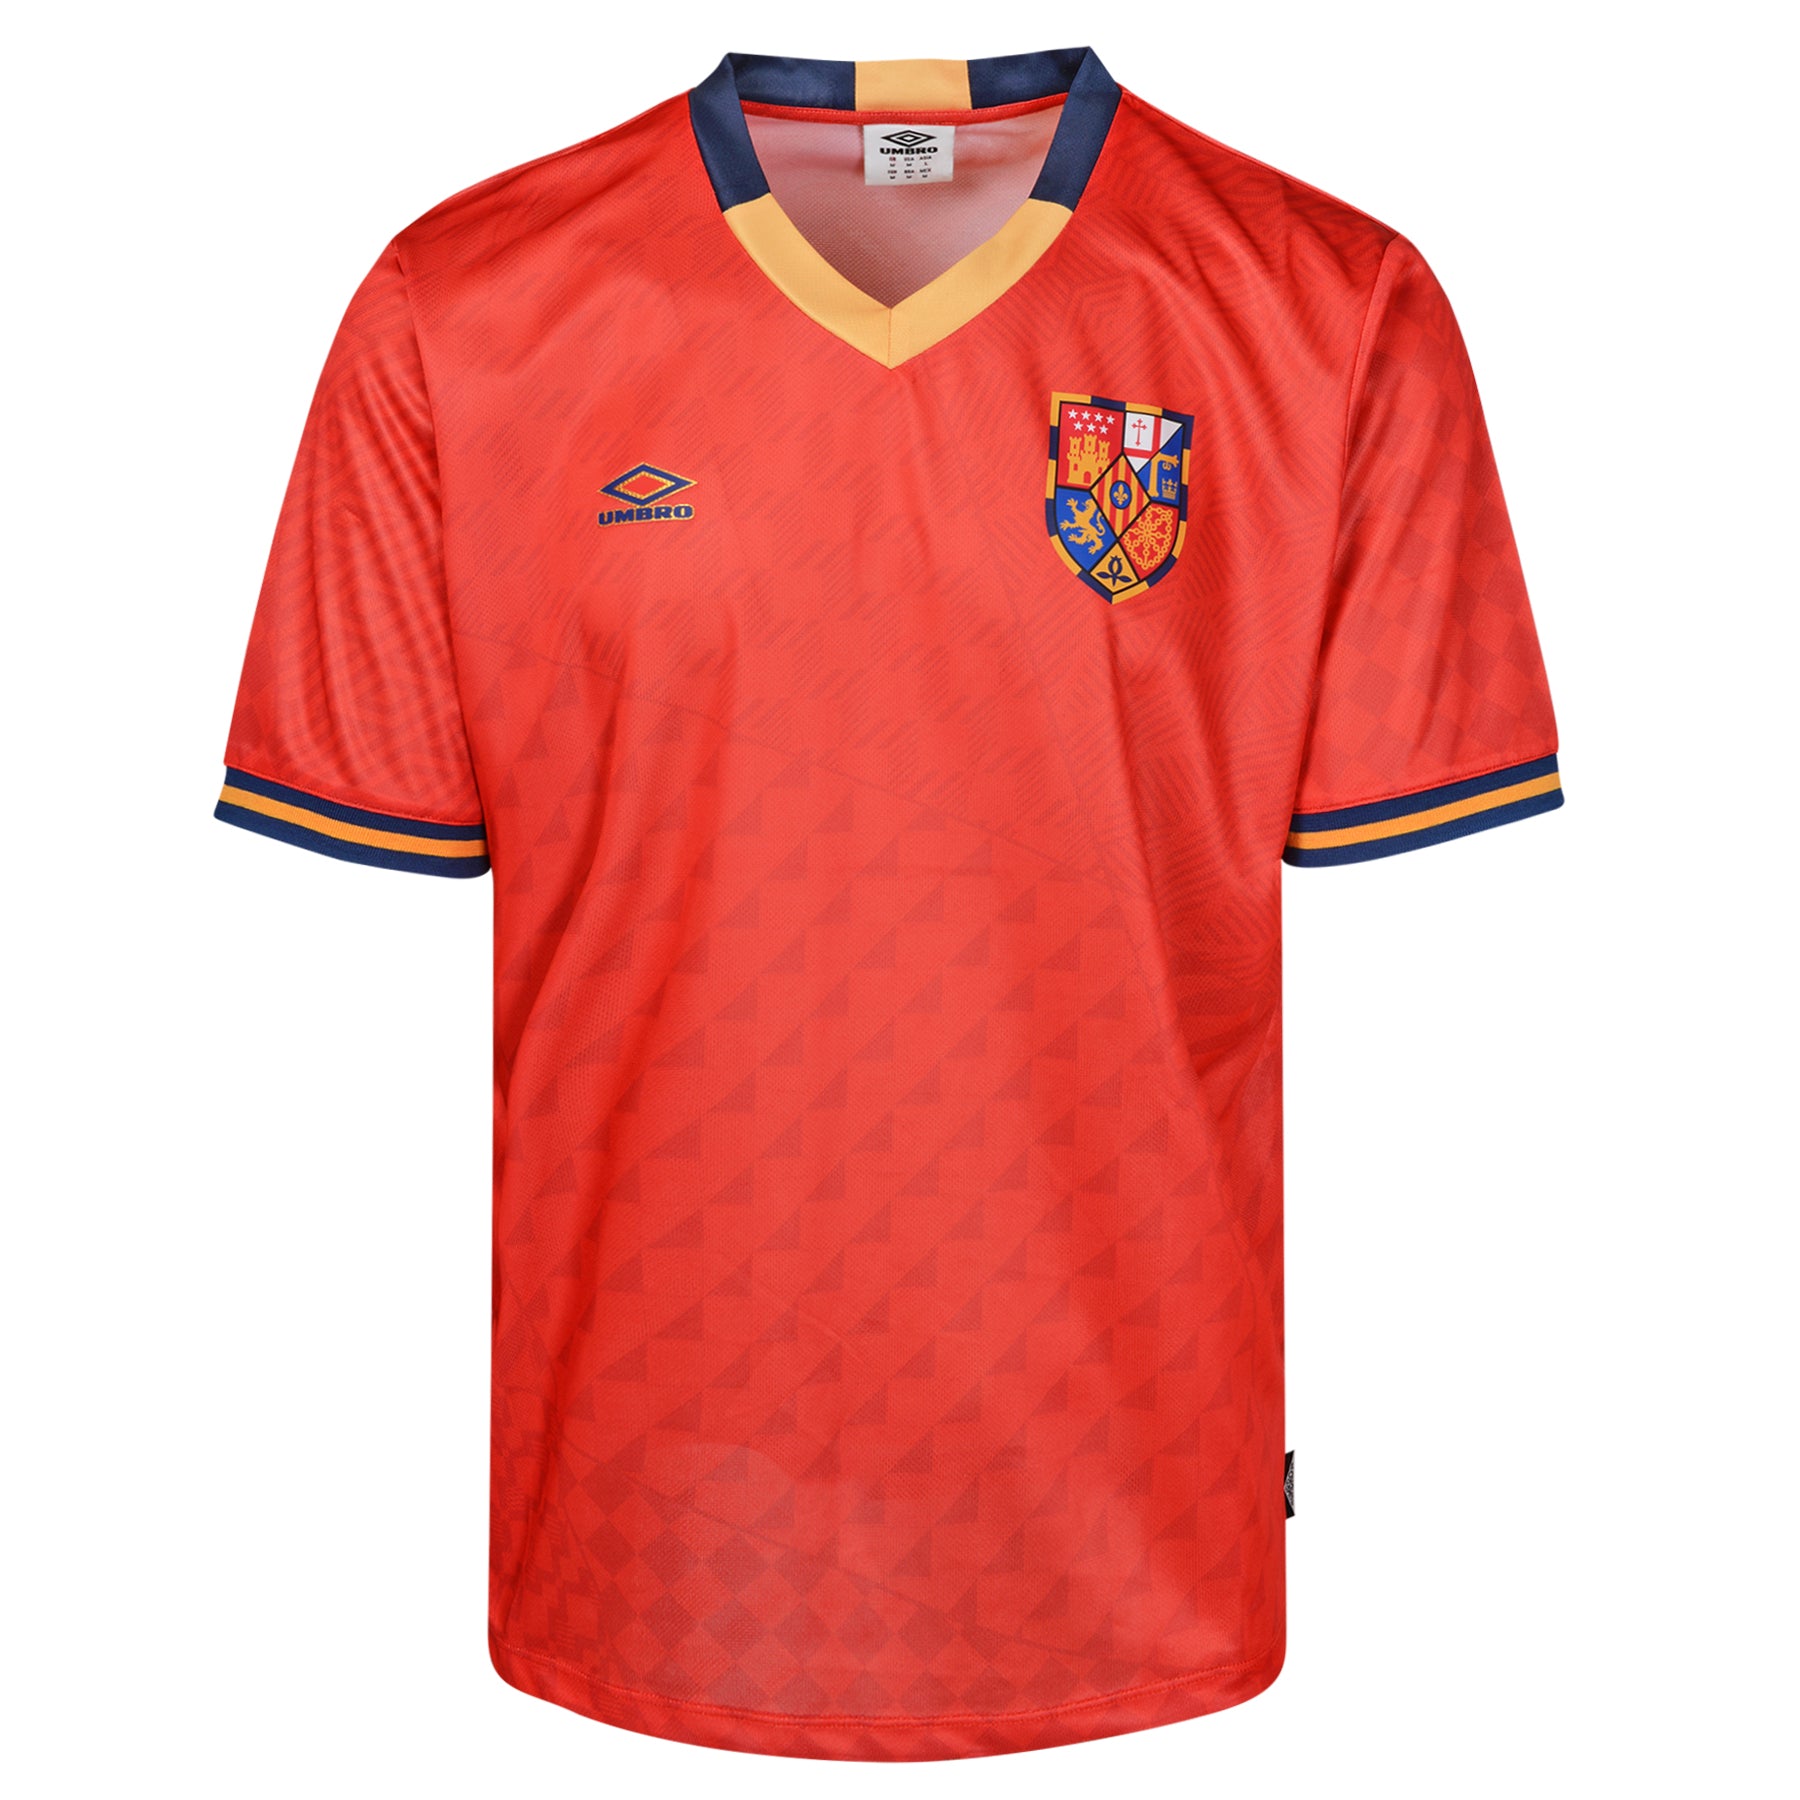 2024 SPAIN ICONIC GRAPHIC JERSEY